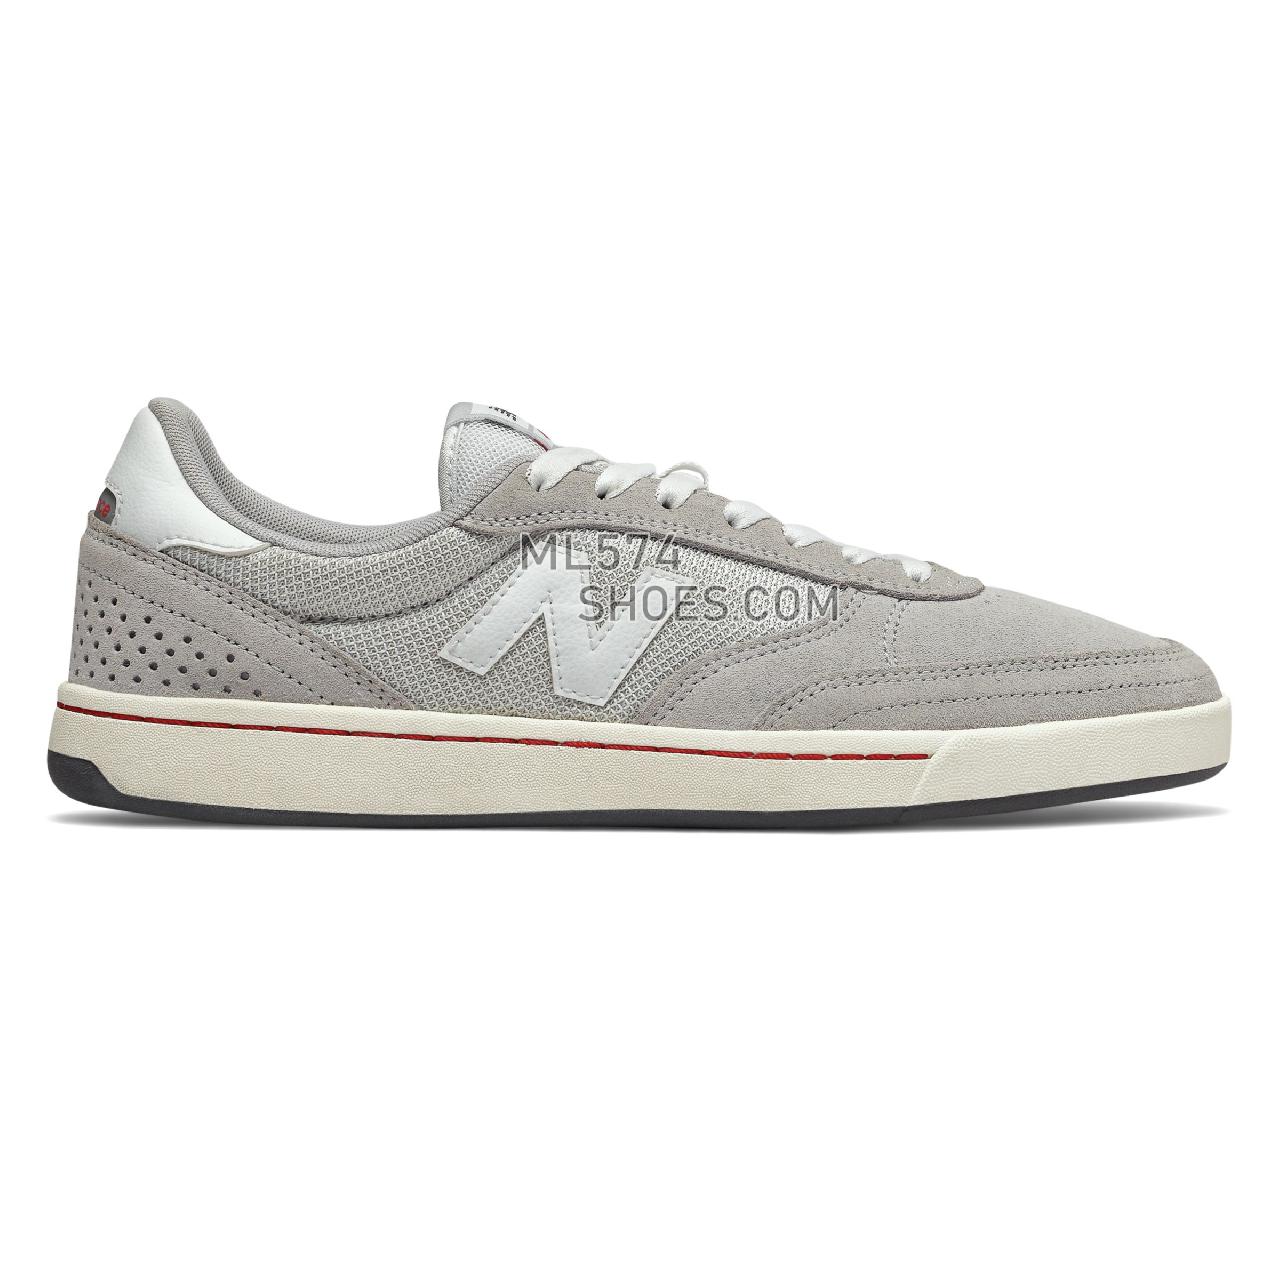 New Balance Numeric 440 - Men's NB Numeric Skate - Grey with White - NM440GRS